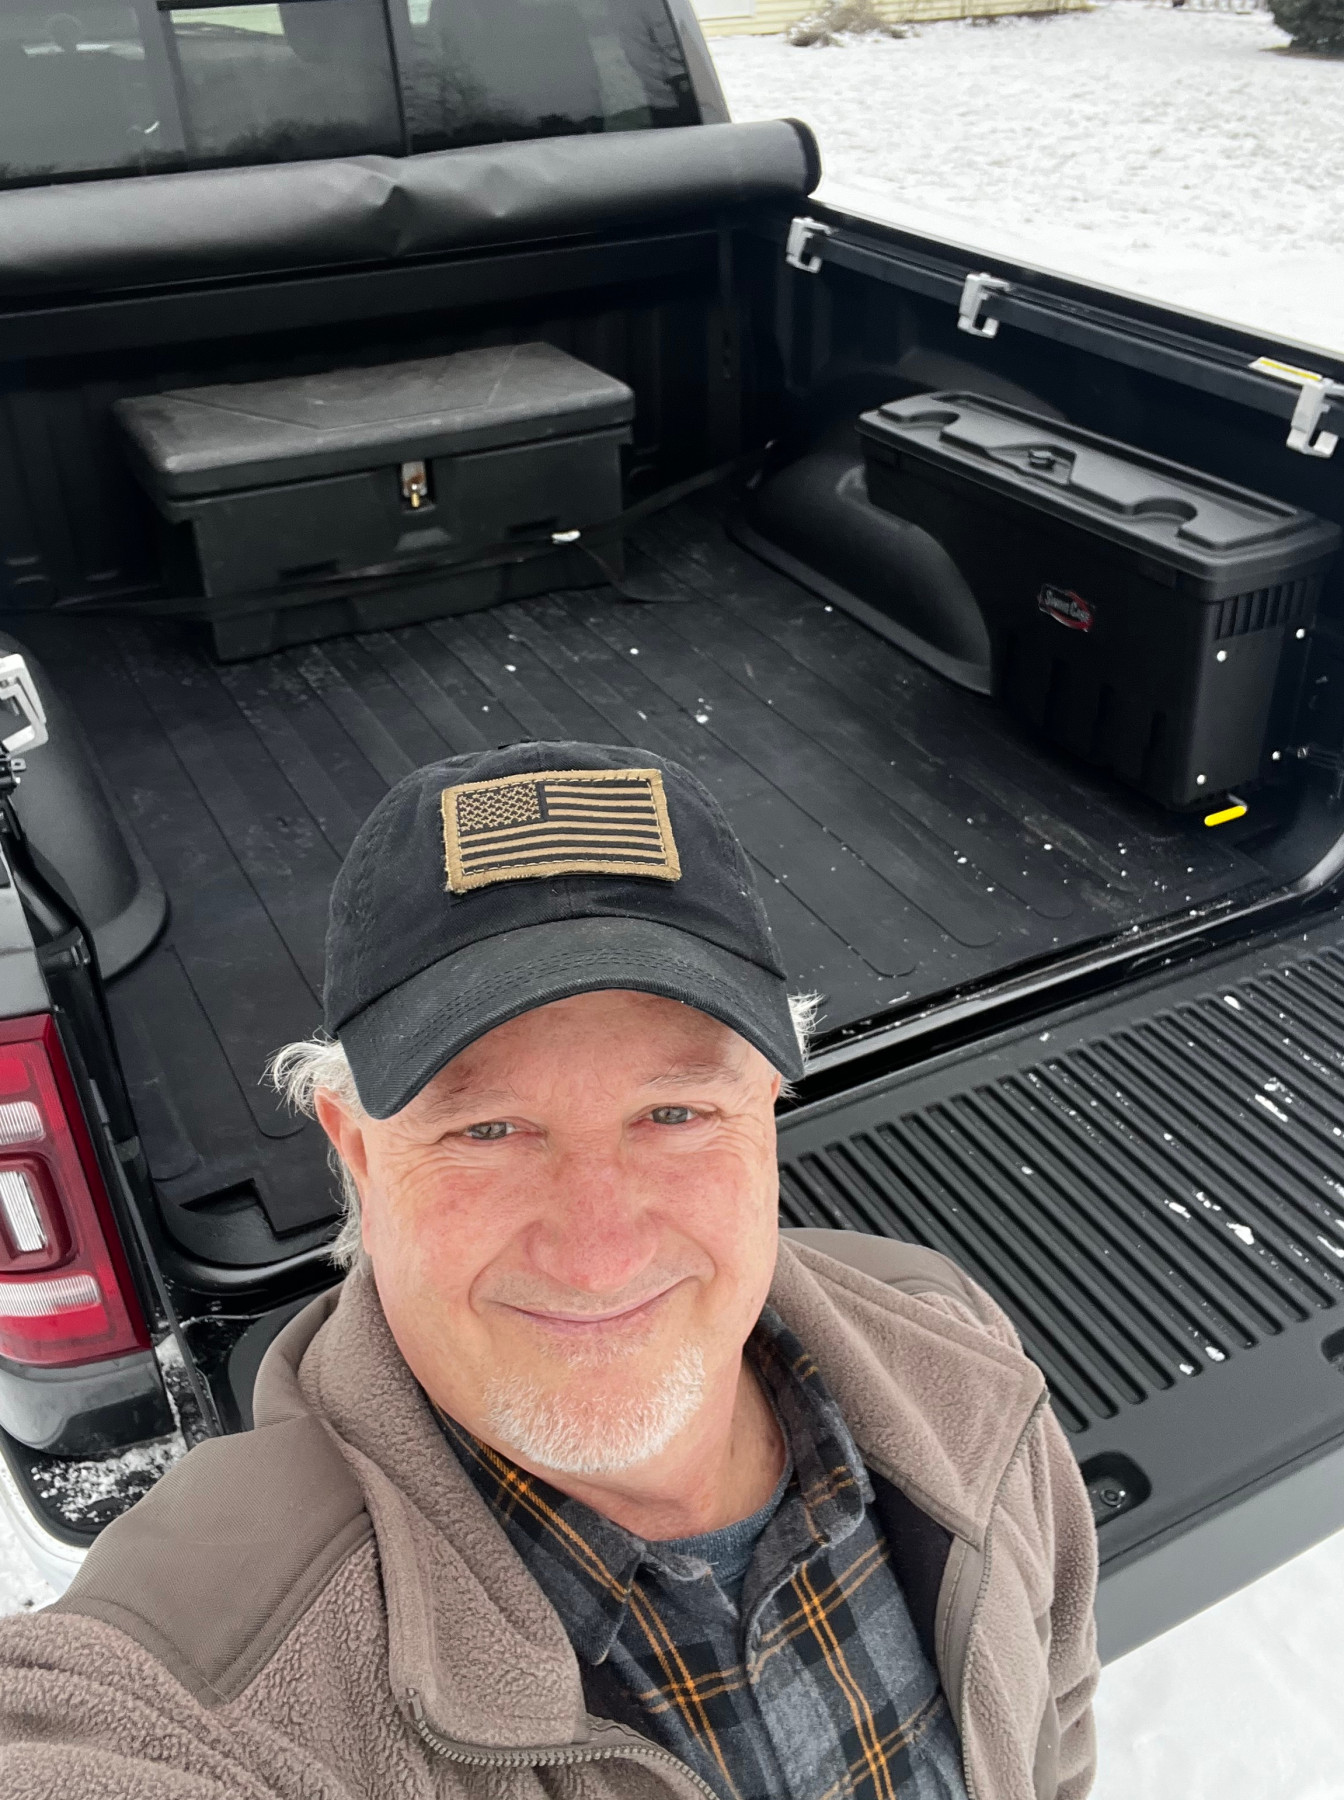 DualLiner Reviews - What People Say About the DualLiner Truck Bed